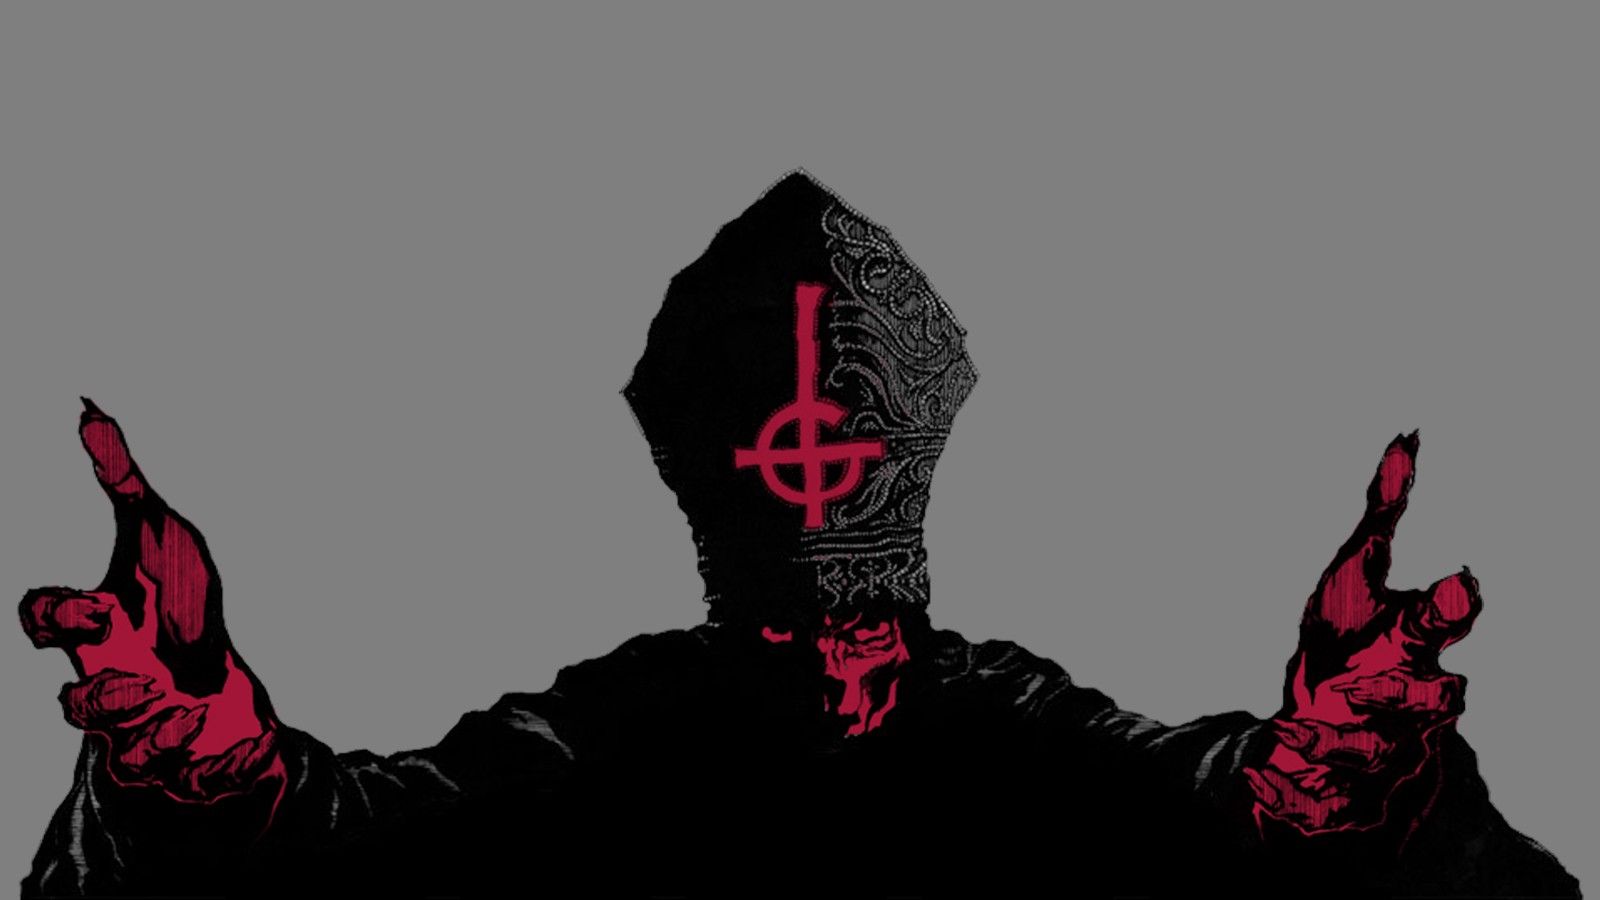 A black and red illustration of a bishop in a black robe with a pink cross on their forehead. - Cross